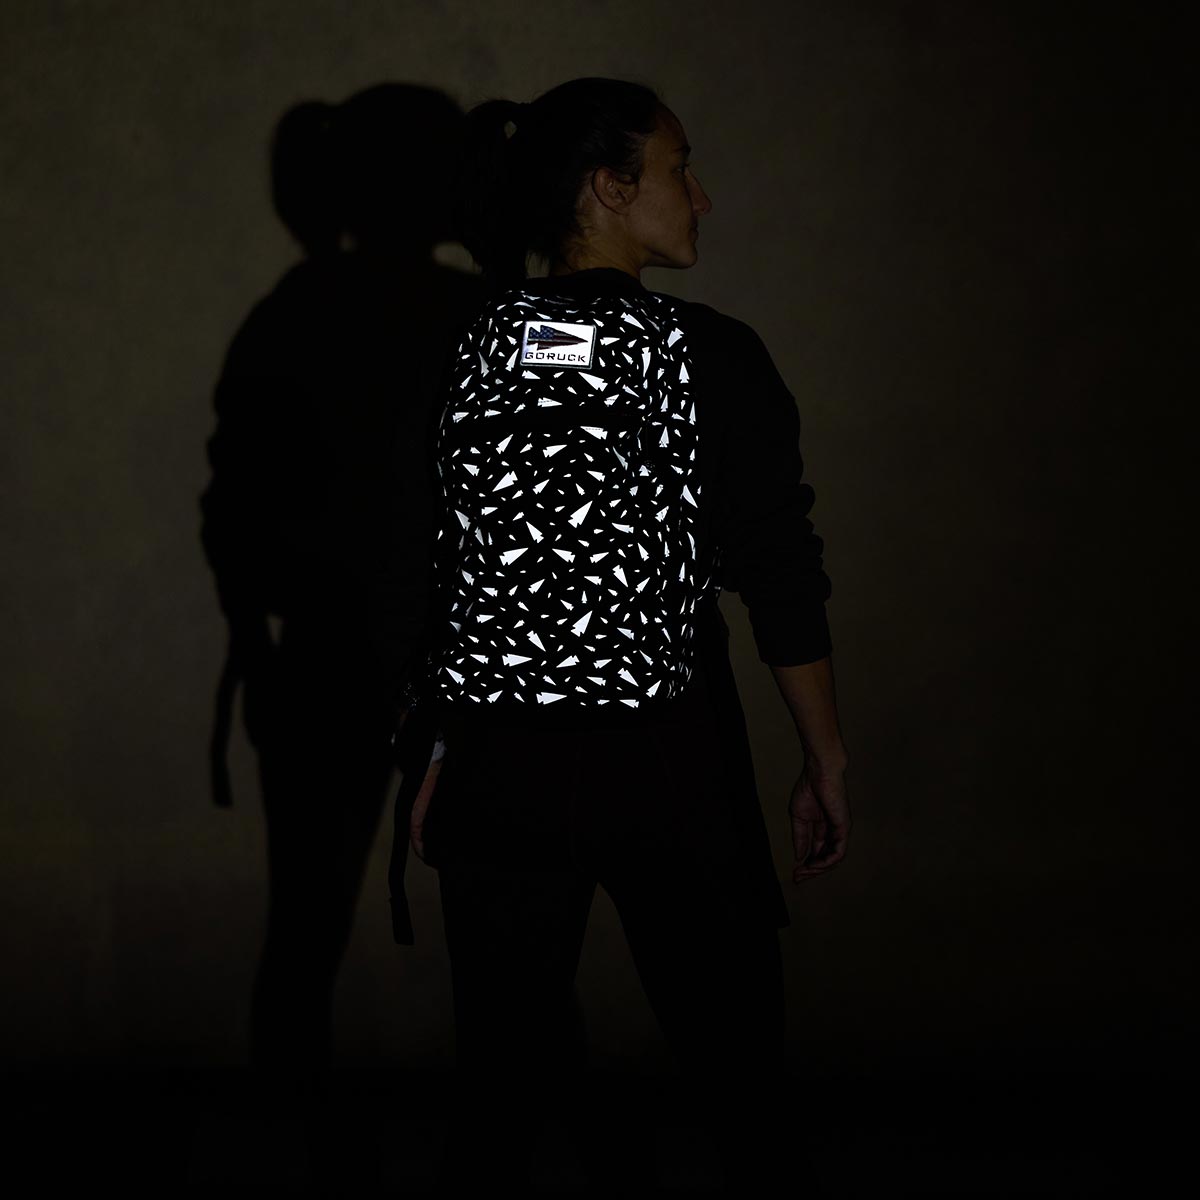 Bullet Ruck - Classic - Reflective Spearhead